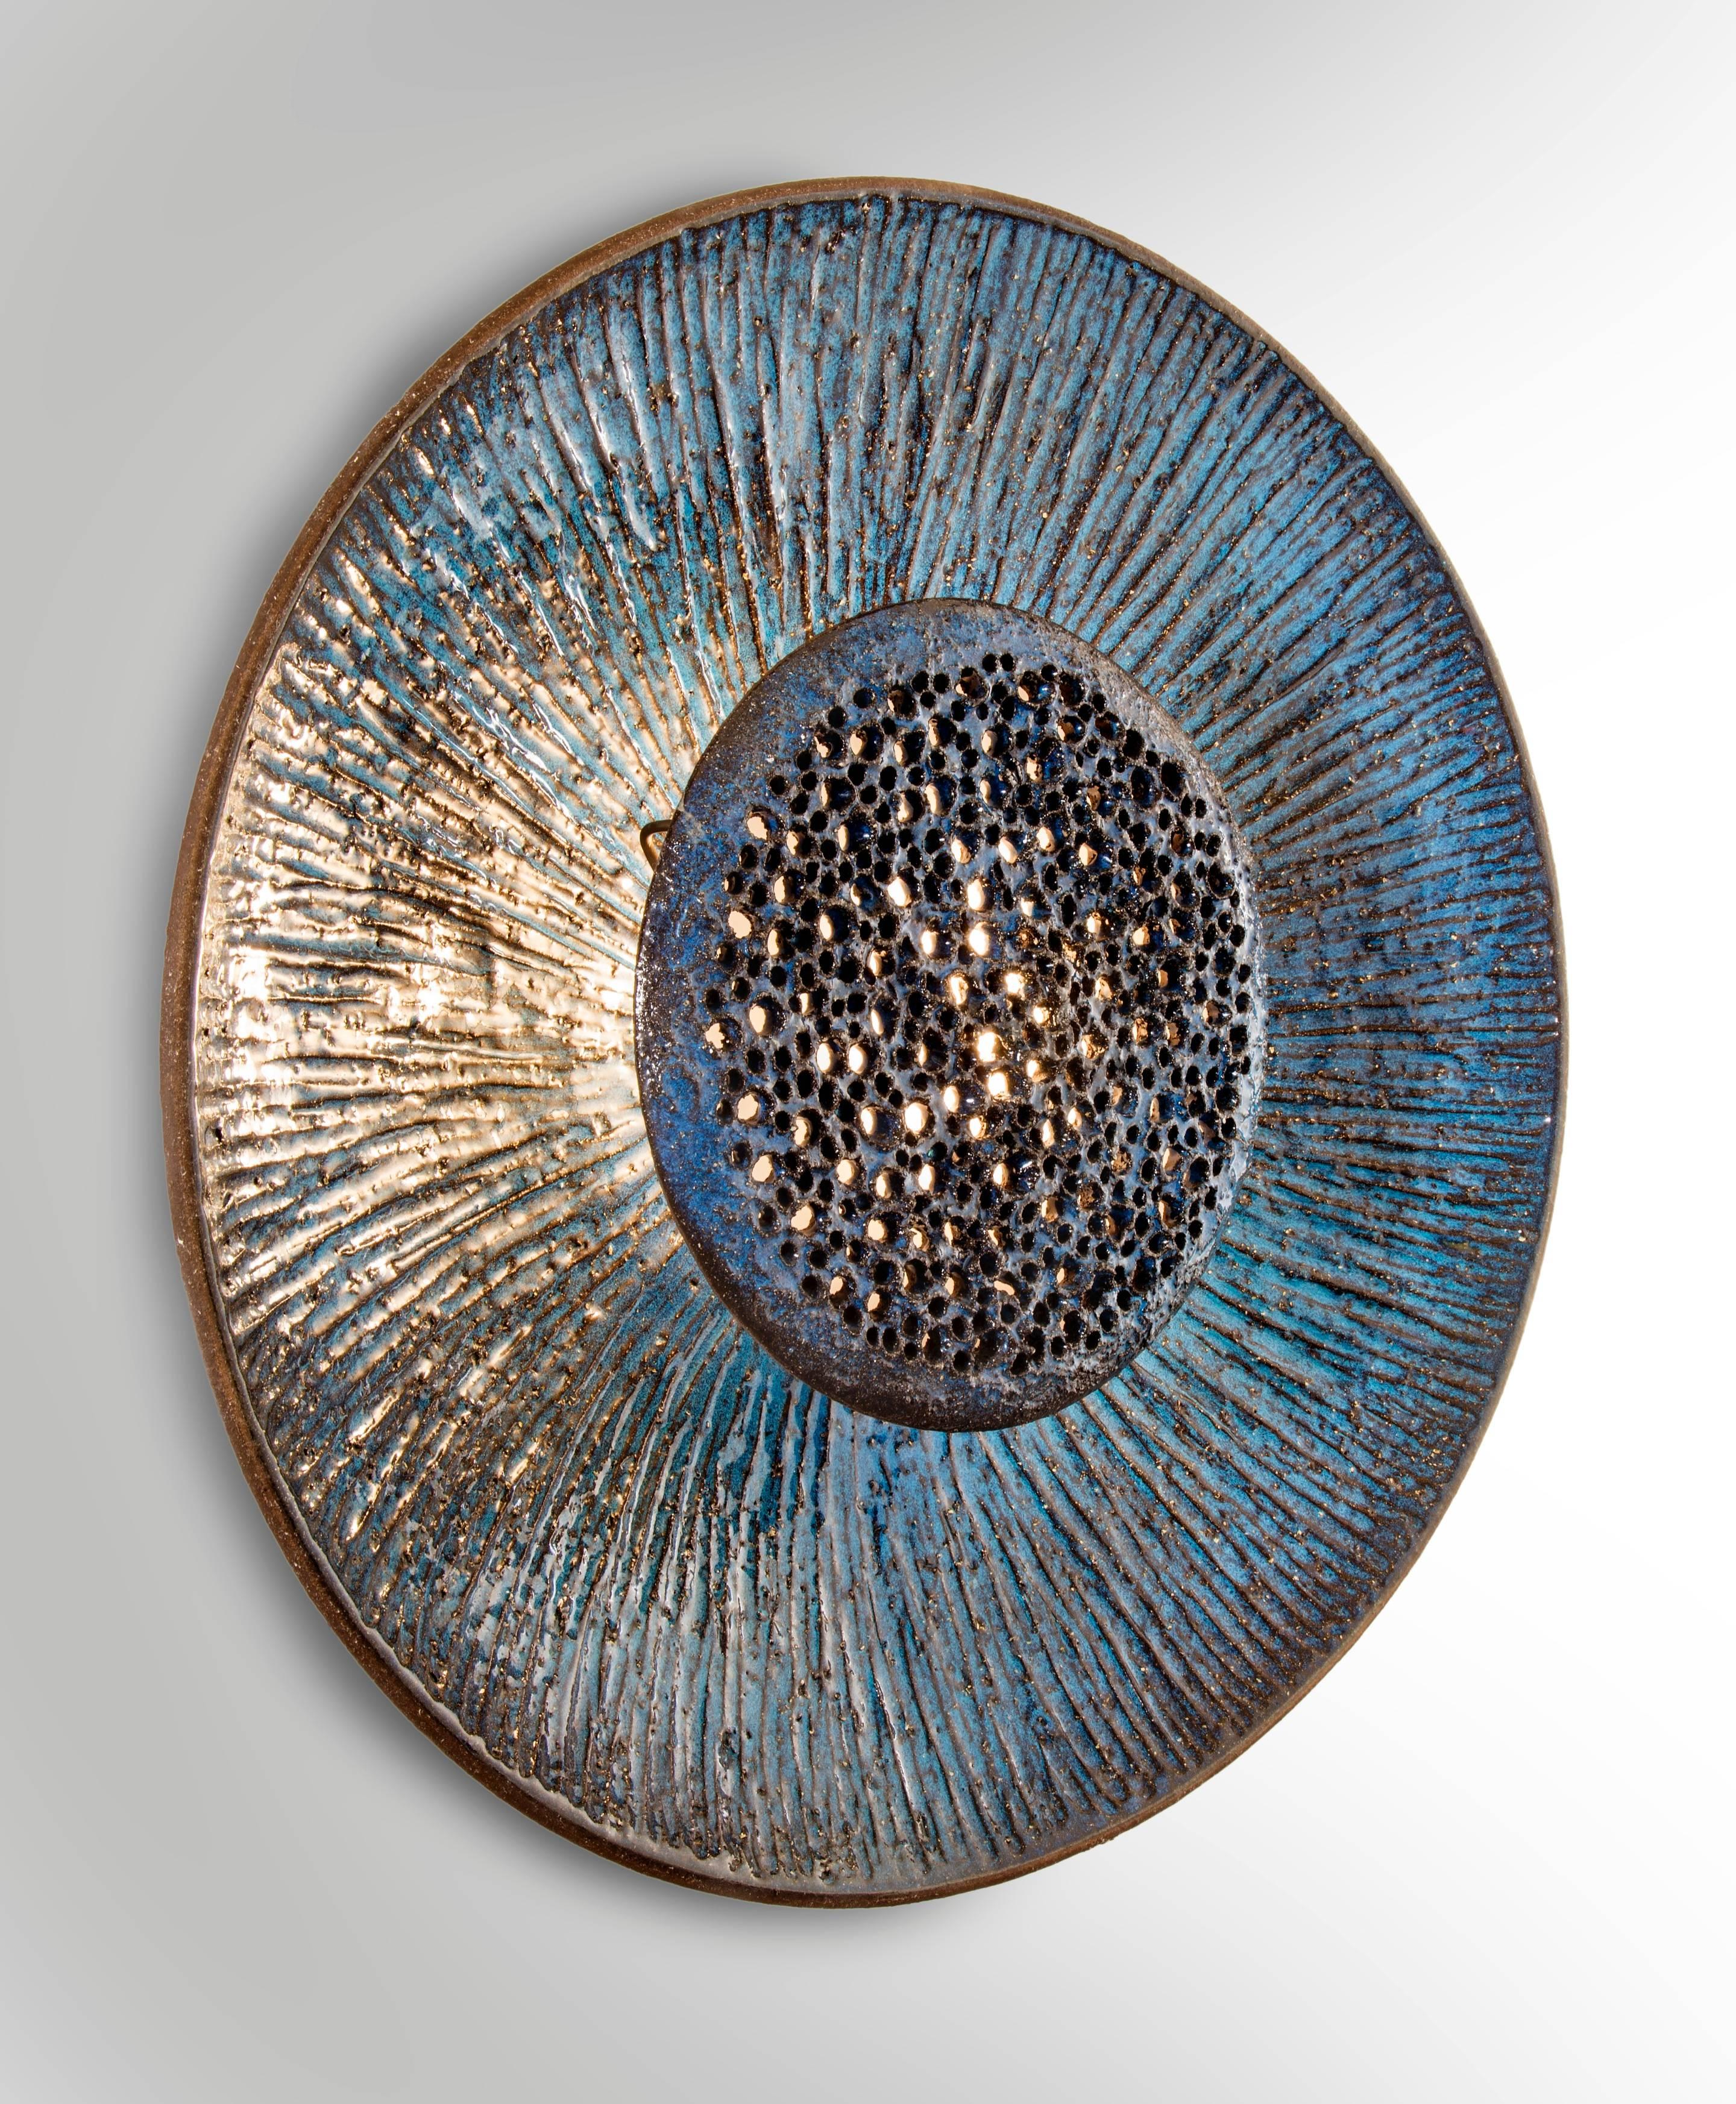 The scored bowl-shaped reflector centering a perforated lotus diffuser, the whole in a richly variegated blue glaze.